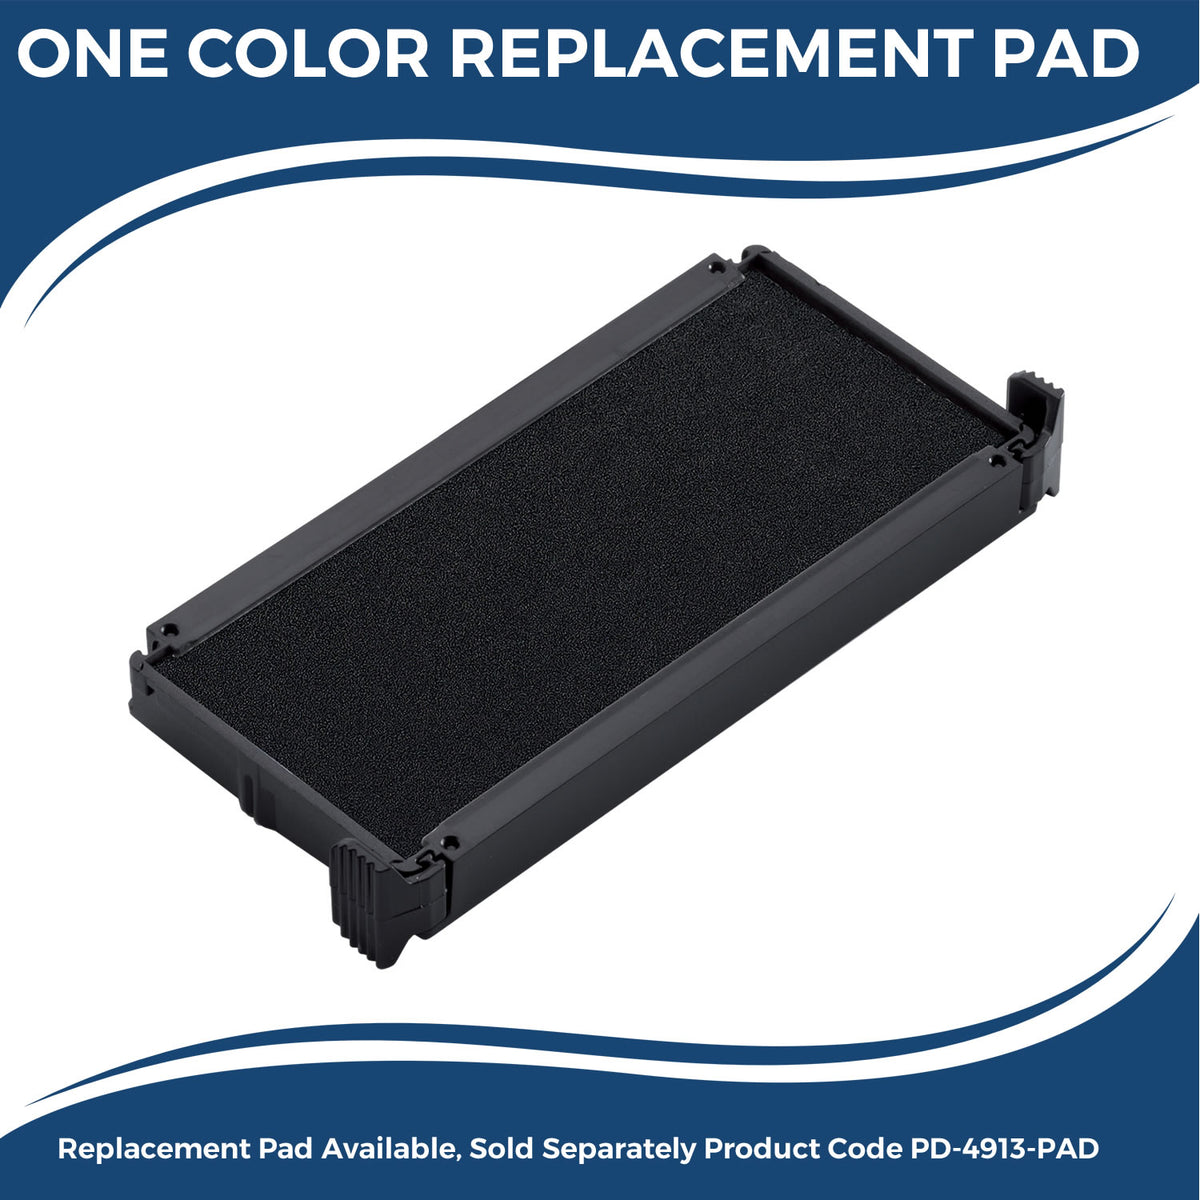 Large Self-Inking Skinny To the Parents of Stamp 5615S Large Replacment Pad